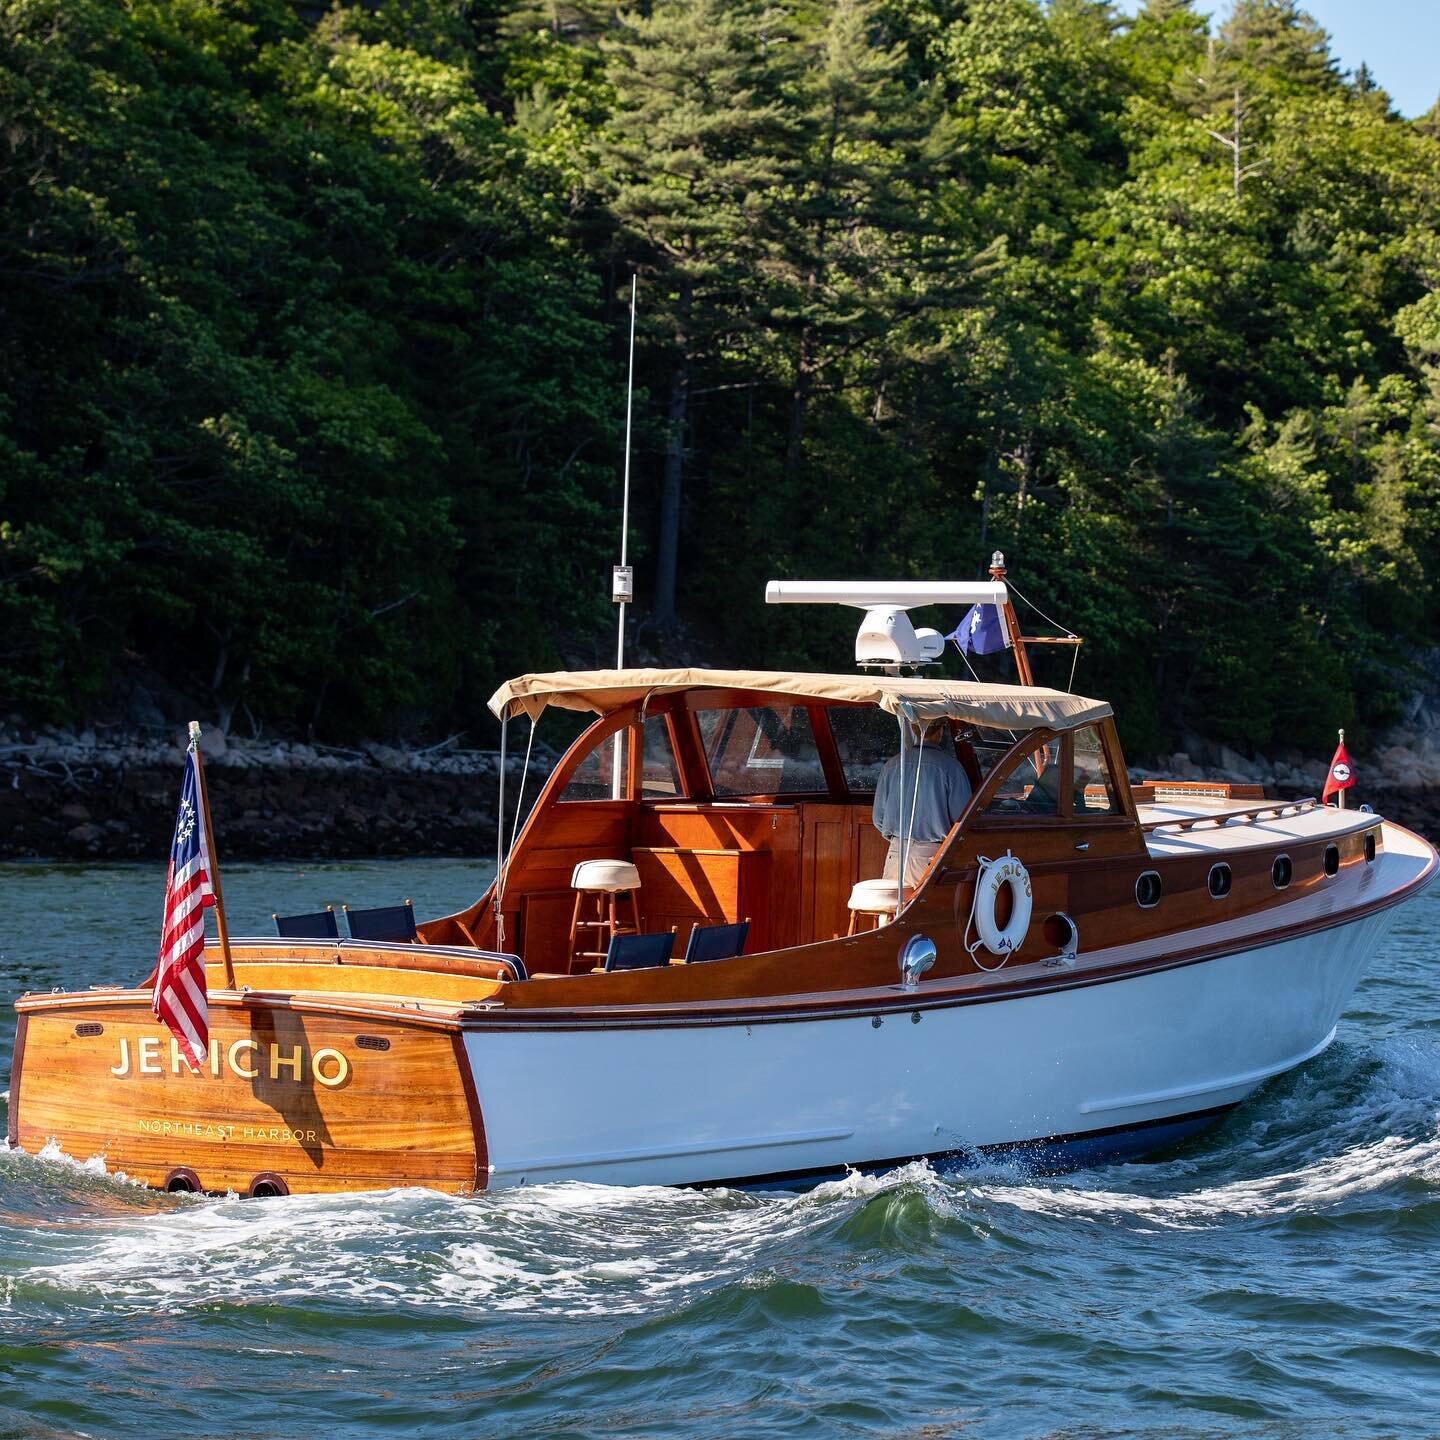 Take the sea-nic route: The way life should be! 🇺🇸⚓️
.
.
.
.
#bunkerandellis #lobsteryacht #woodenboat #maine #mainelife #downeastboats #downeast